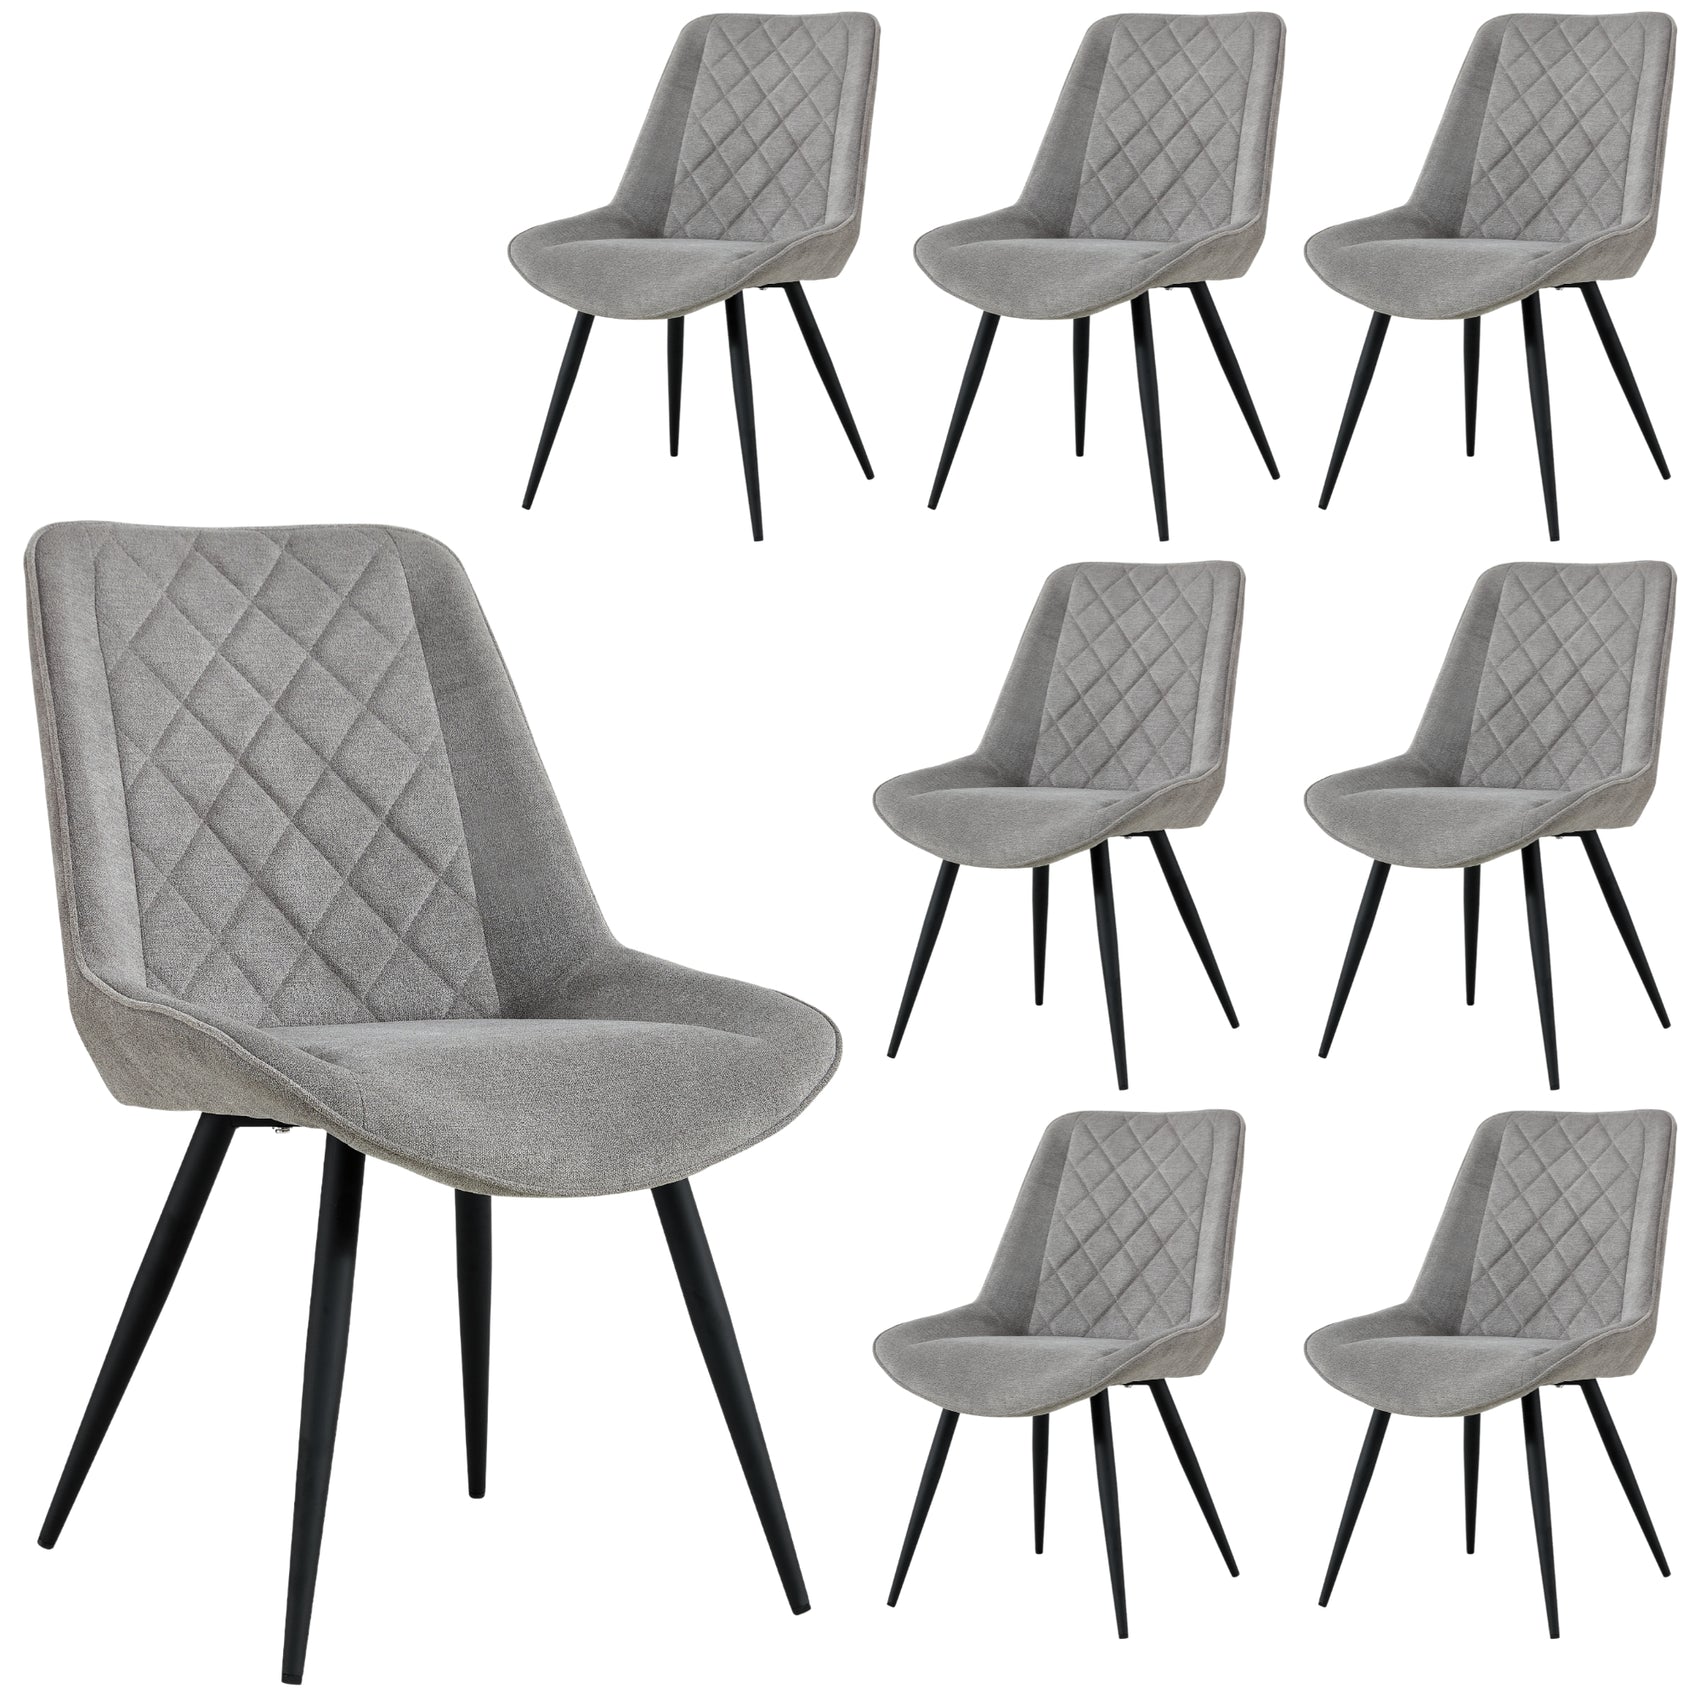 Helenium Dining Chair Set of 8 Fabric Seat with Metal Frame - Granite